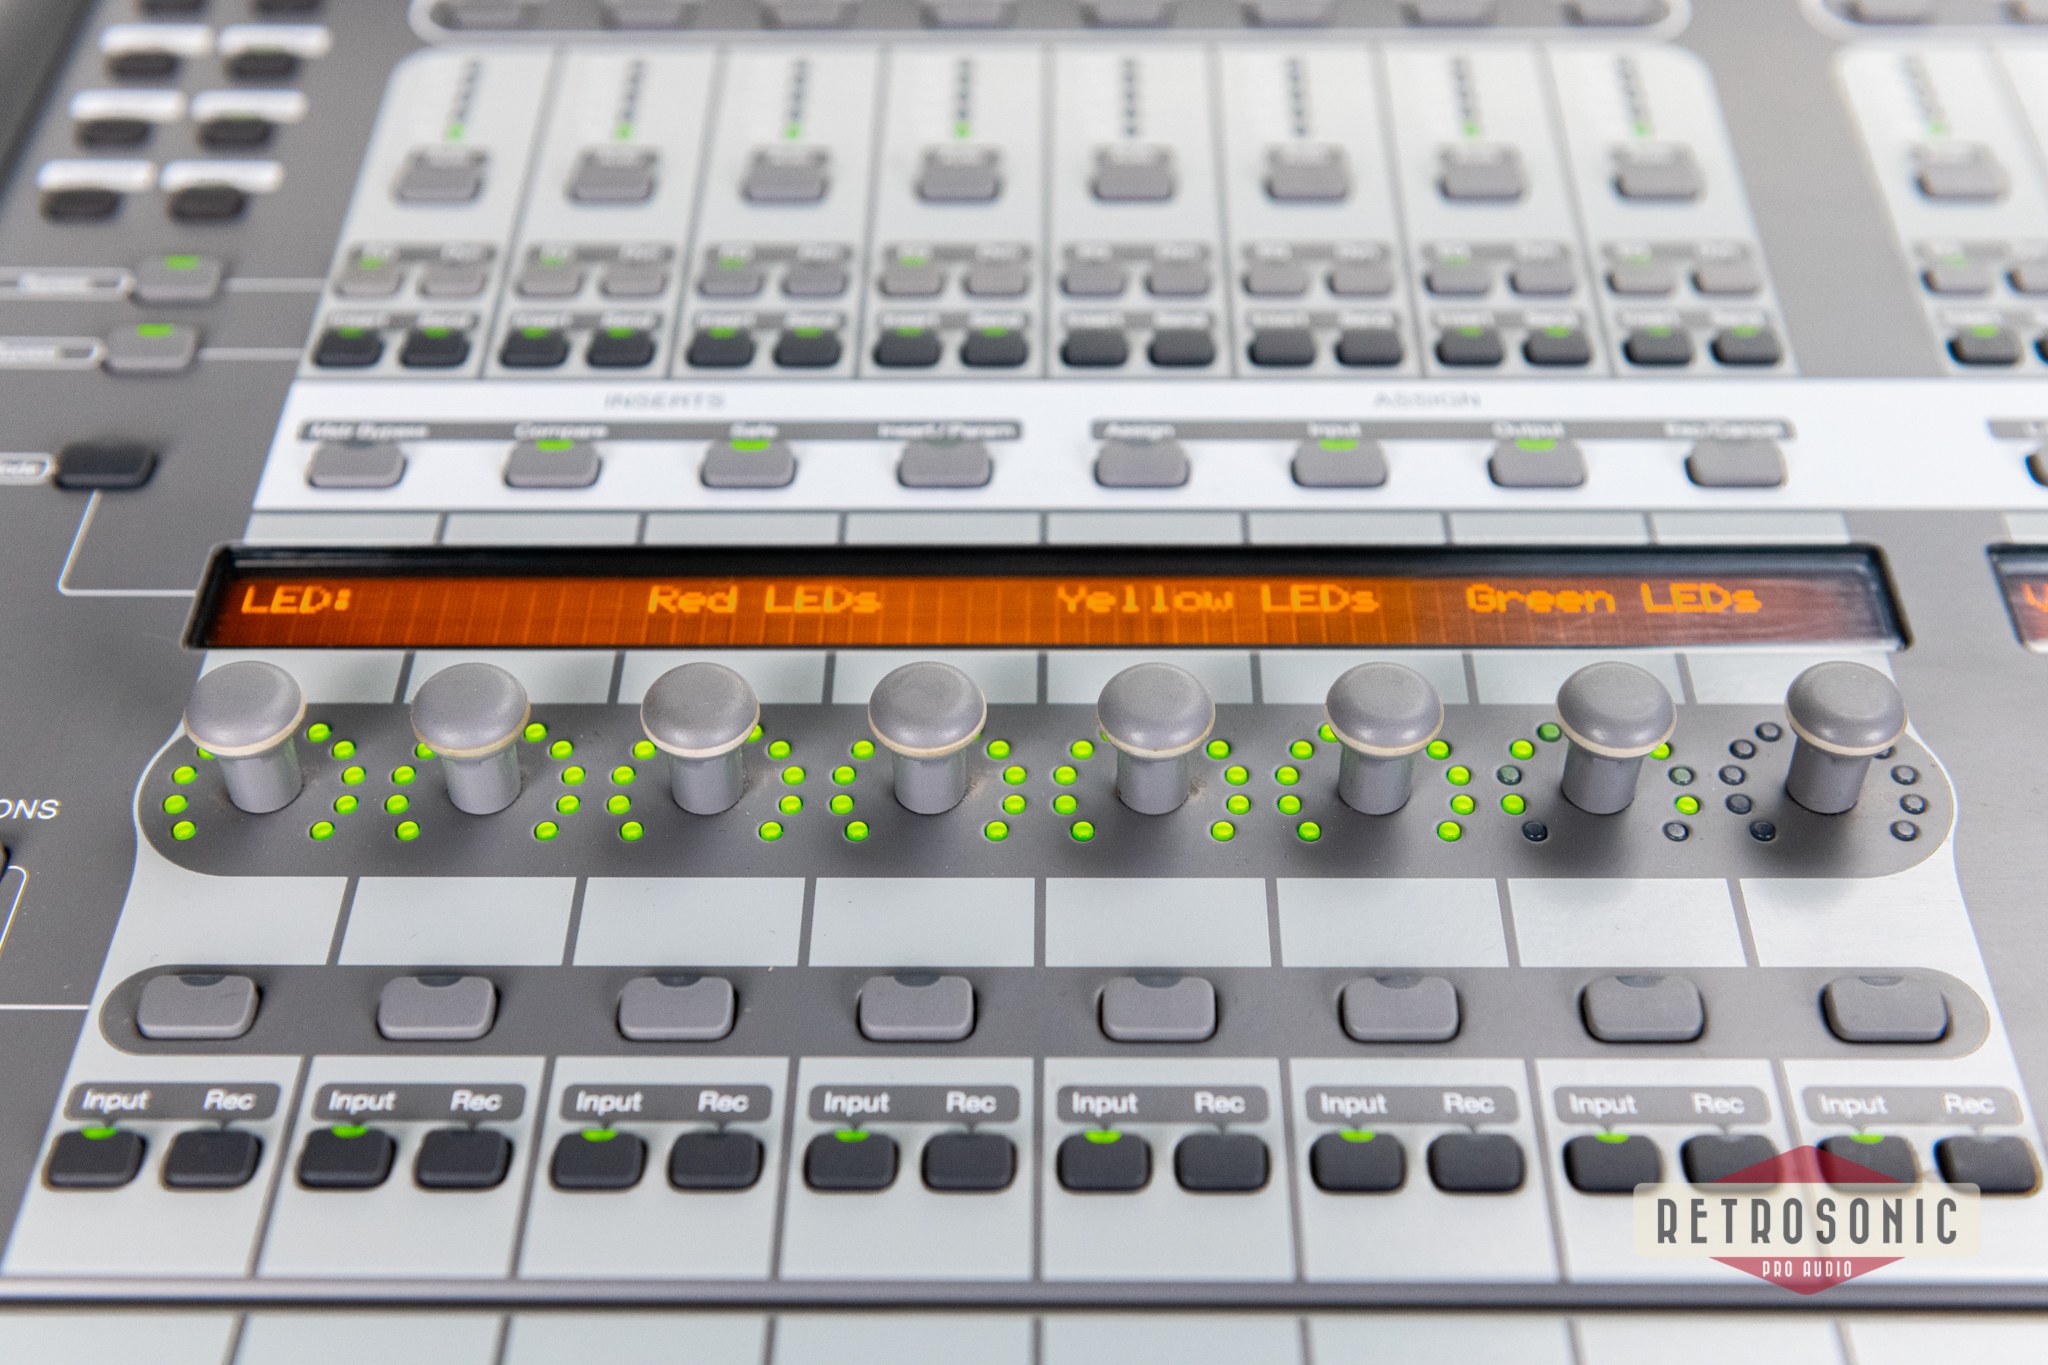 Avid Digidesign C24 Control Surface For Pro Tools